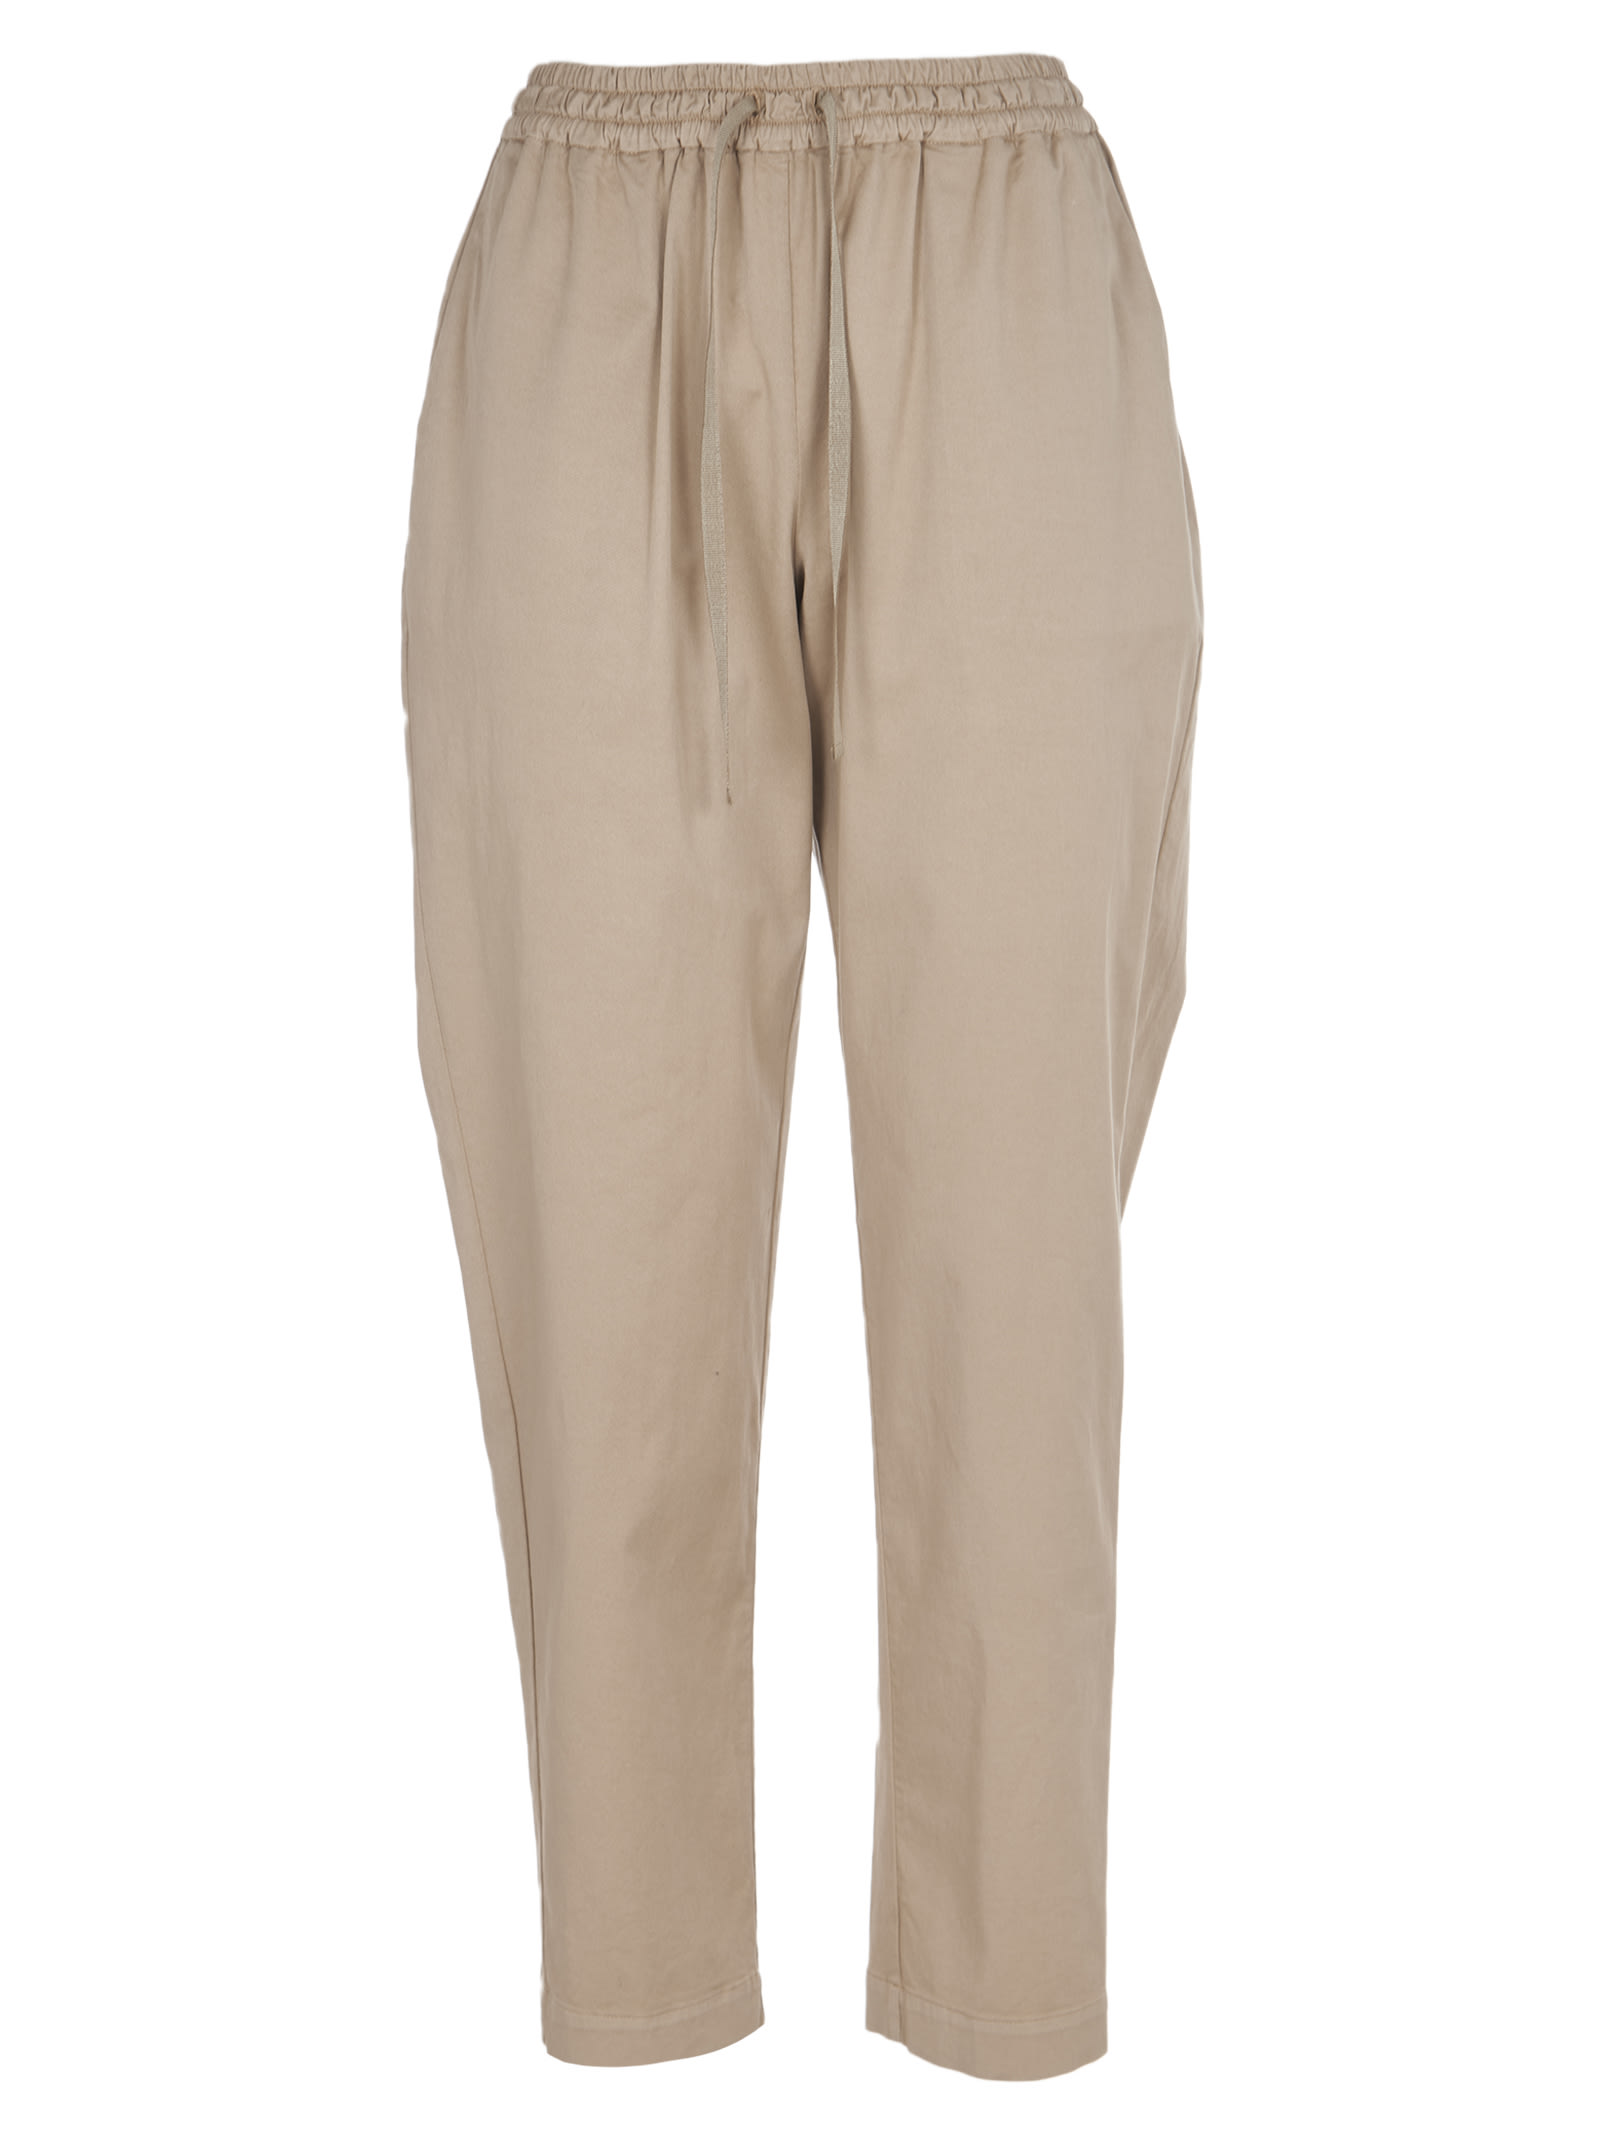 SEMICOUTURE SAND COTTON TROUSERS,Y1S009 BUDDYV62-0